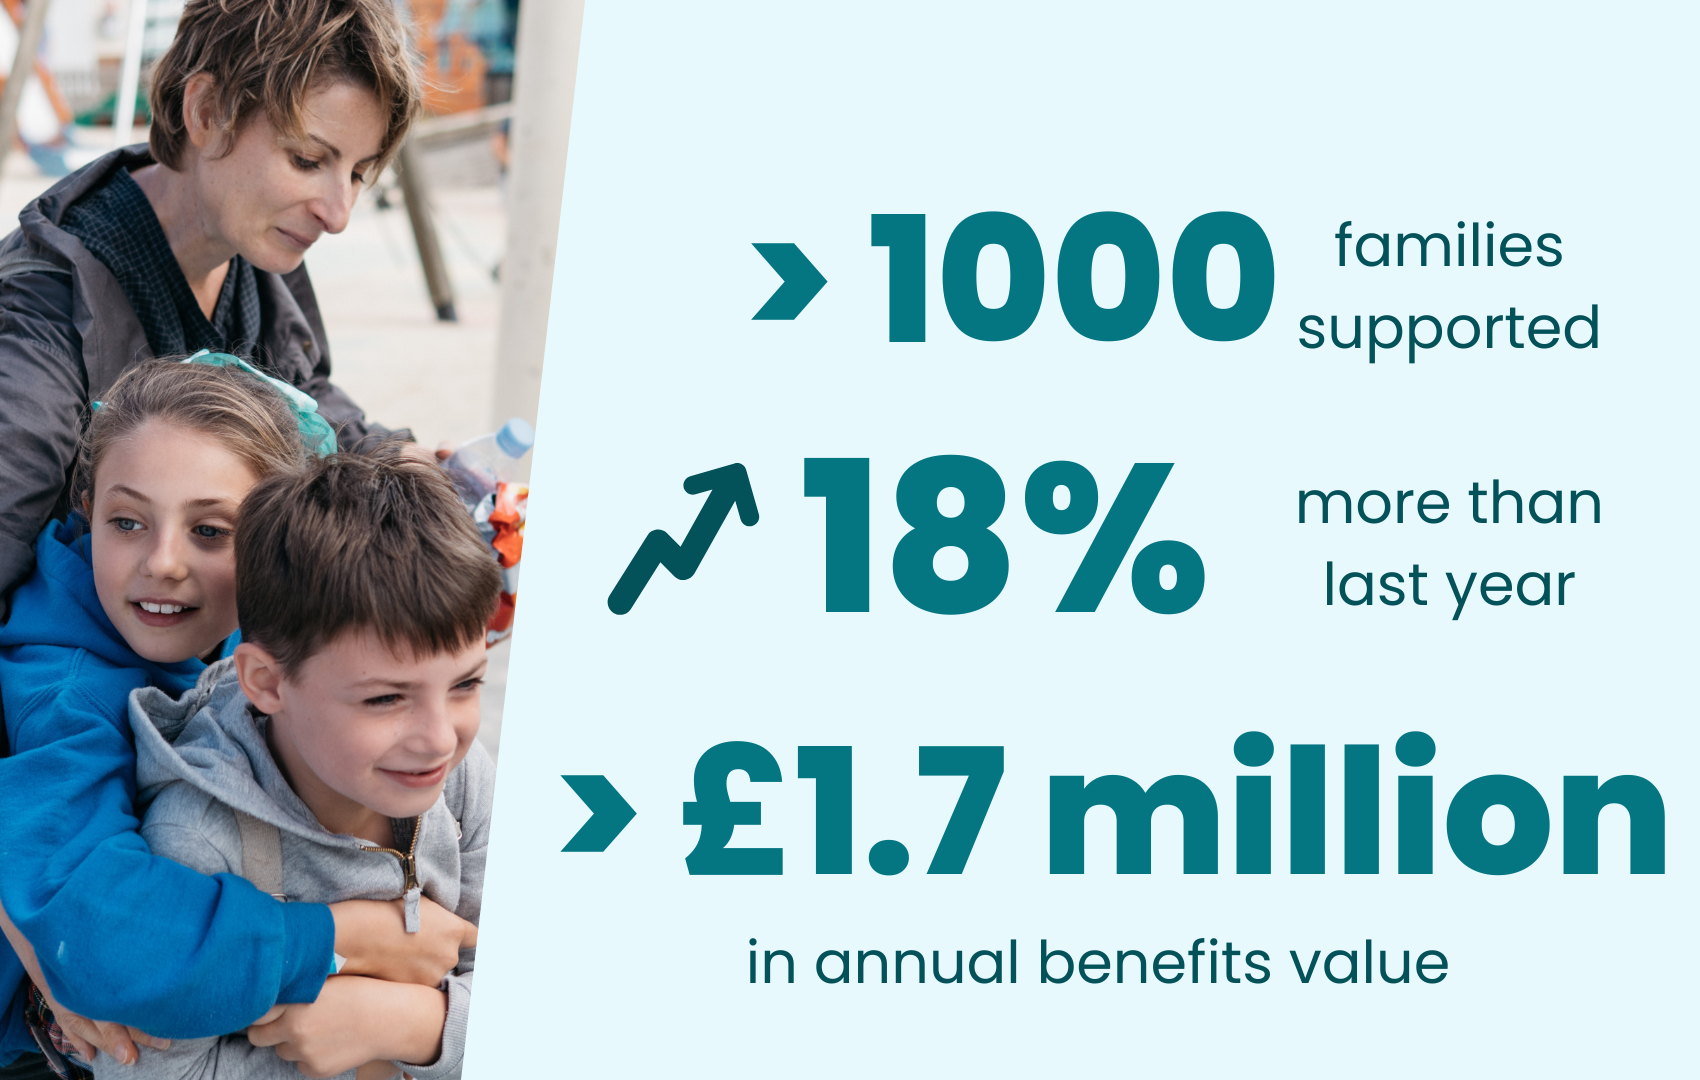 More than 1000 families supported. 18% more than last year. More than £1.7 million in annual benefits value.